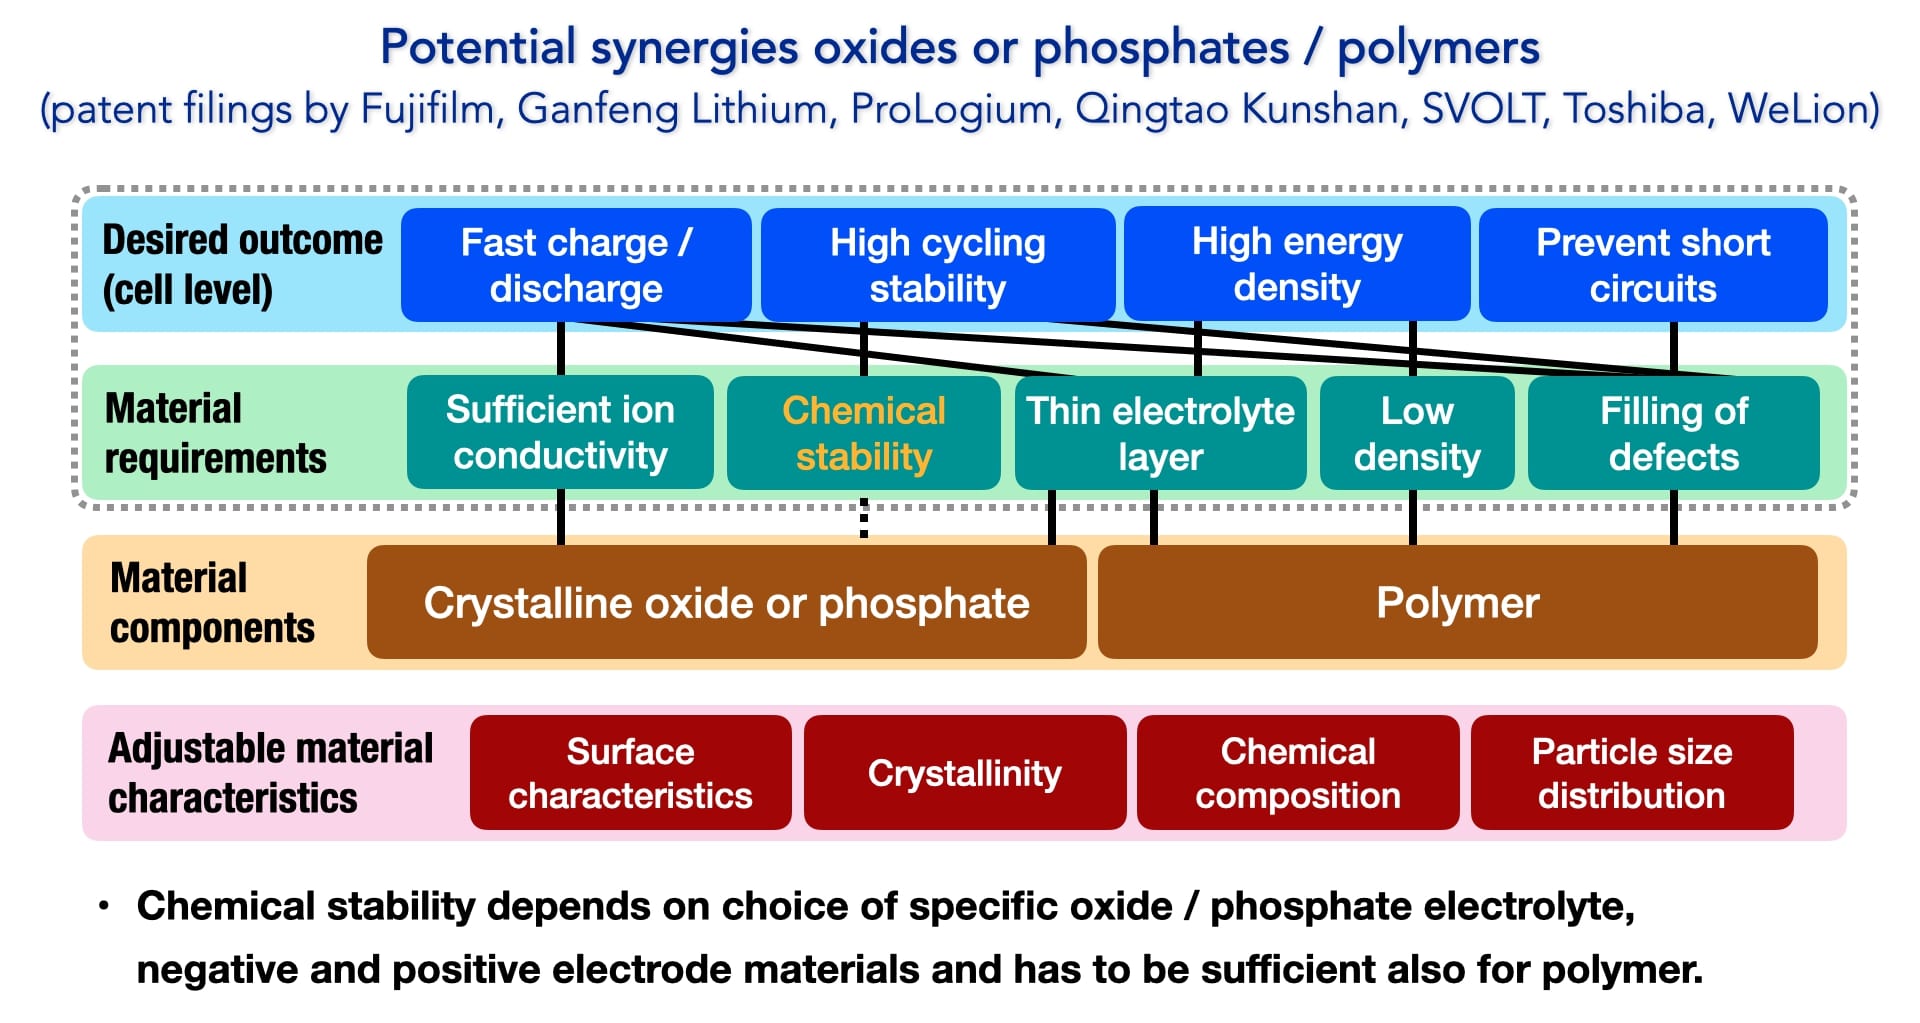 Potential Synergies Between Solid Electrolyte Types: 1) Oxides or Phosphates and 2) Polymers